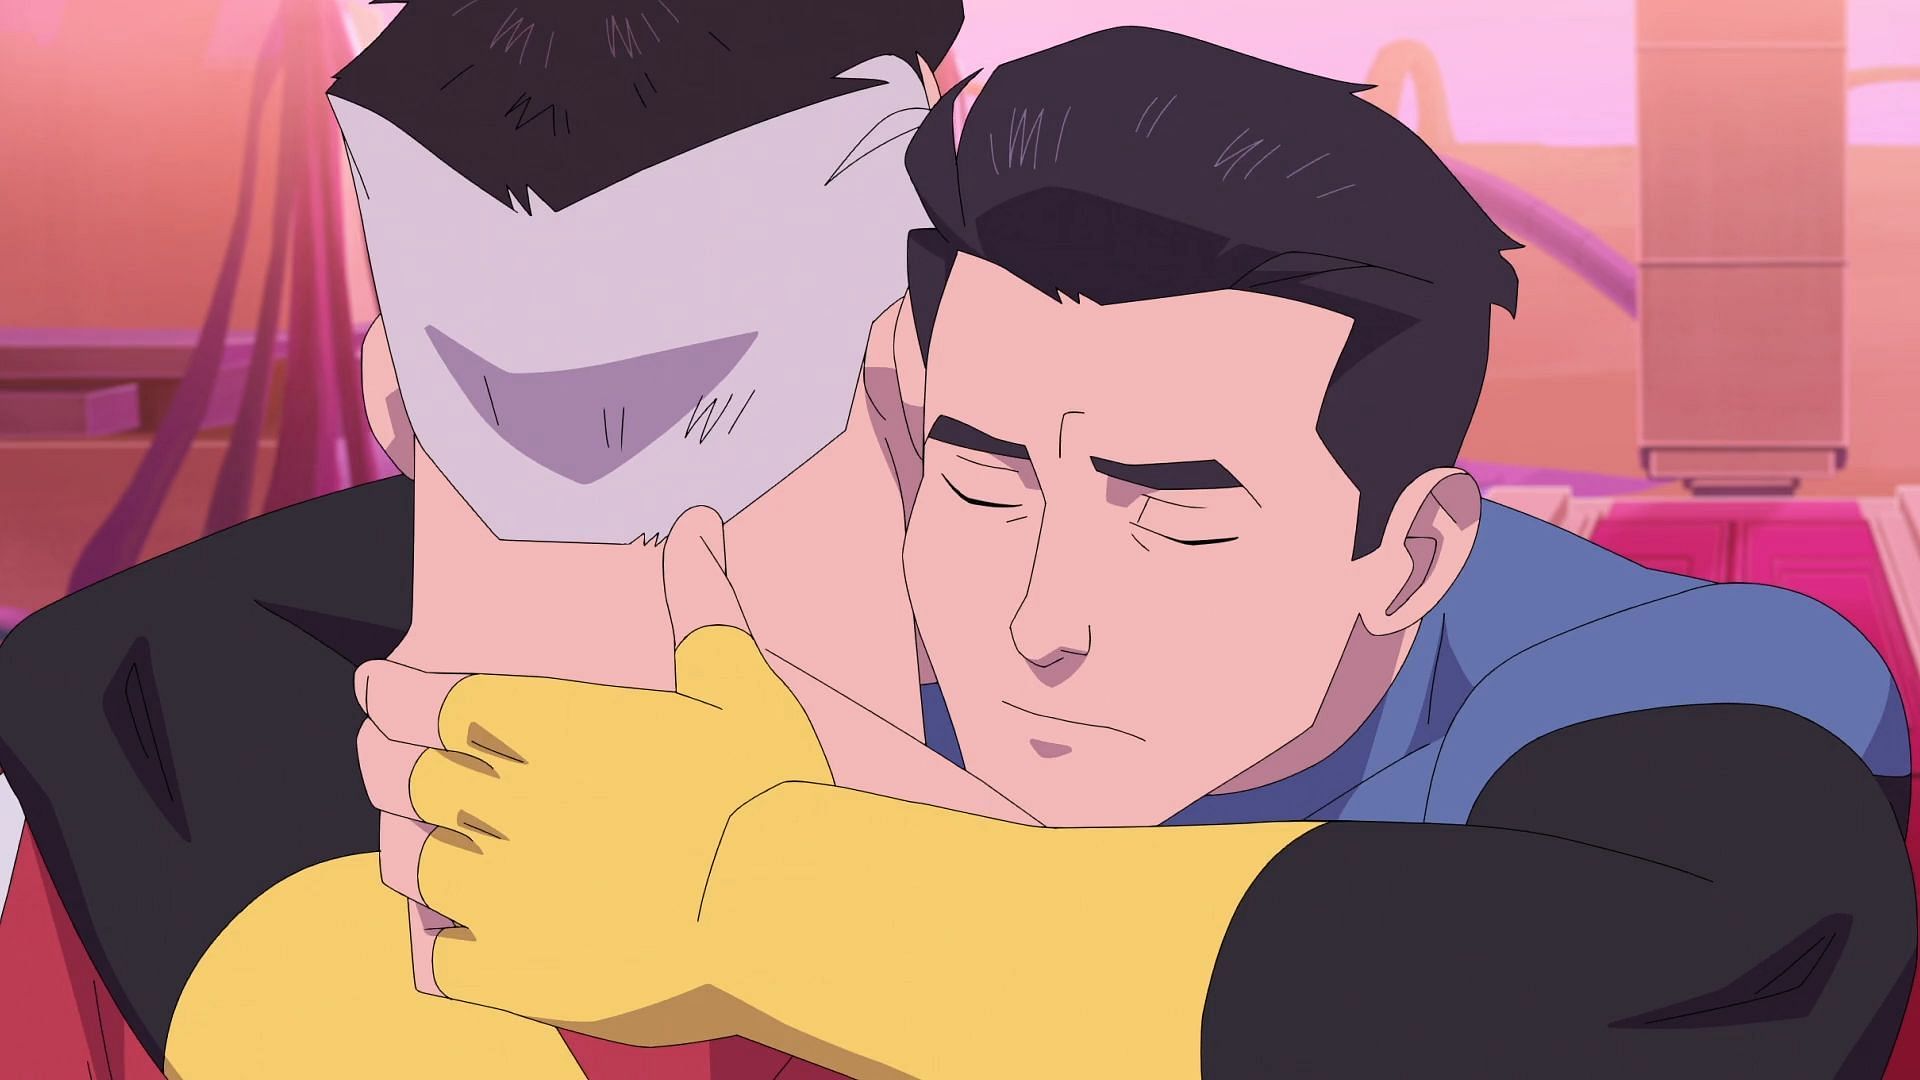 INVINCIBLE Season 2 Part 2 (Episode 5-8) Everything We Know